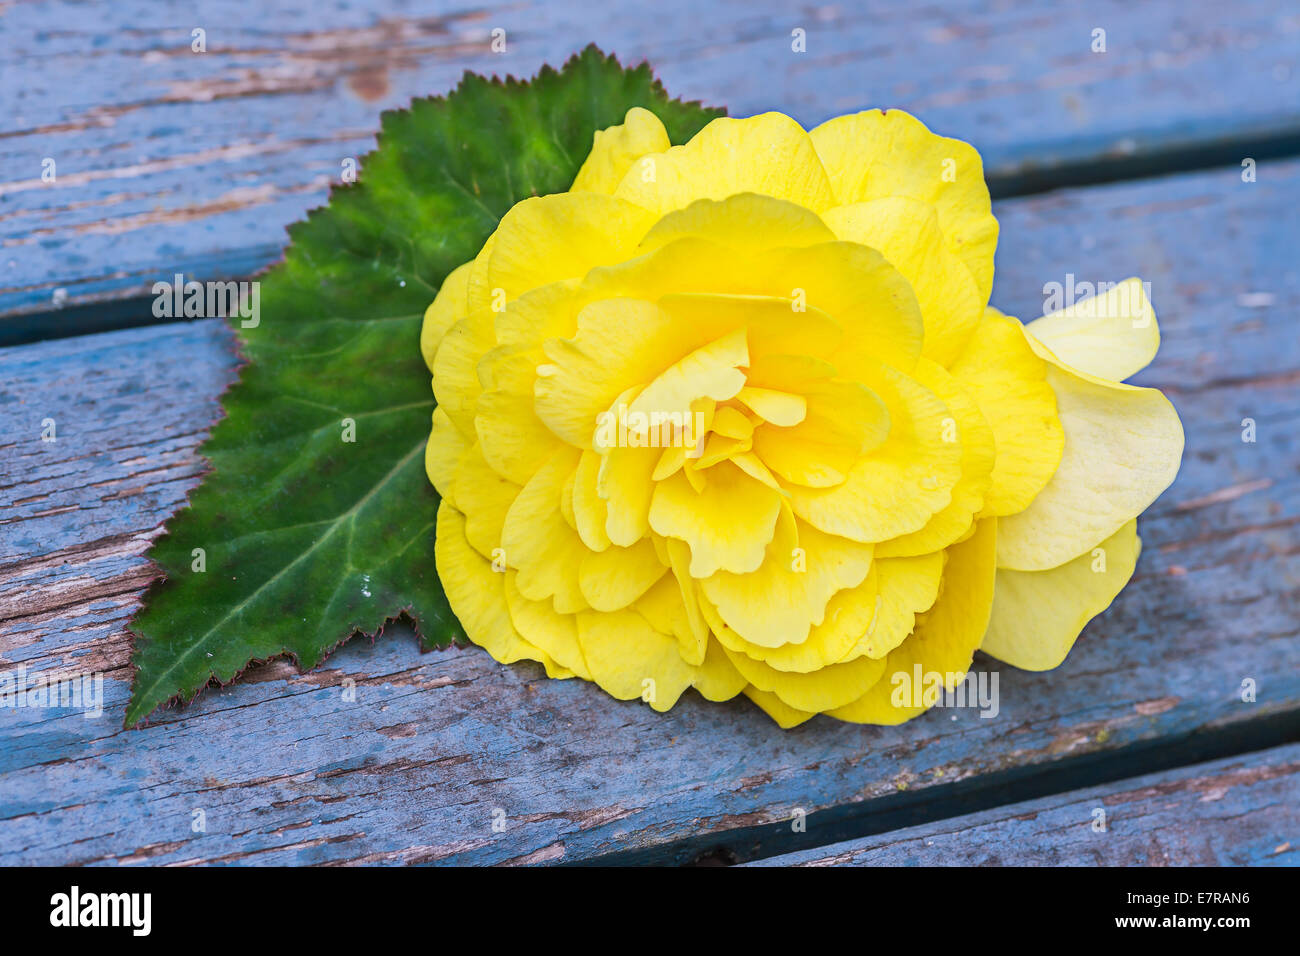 Yellow 'Non Stop' begonia flower against an old wooden background. Stock Photo